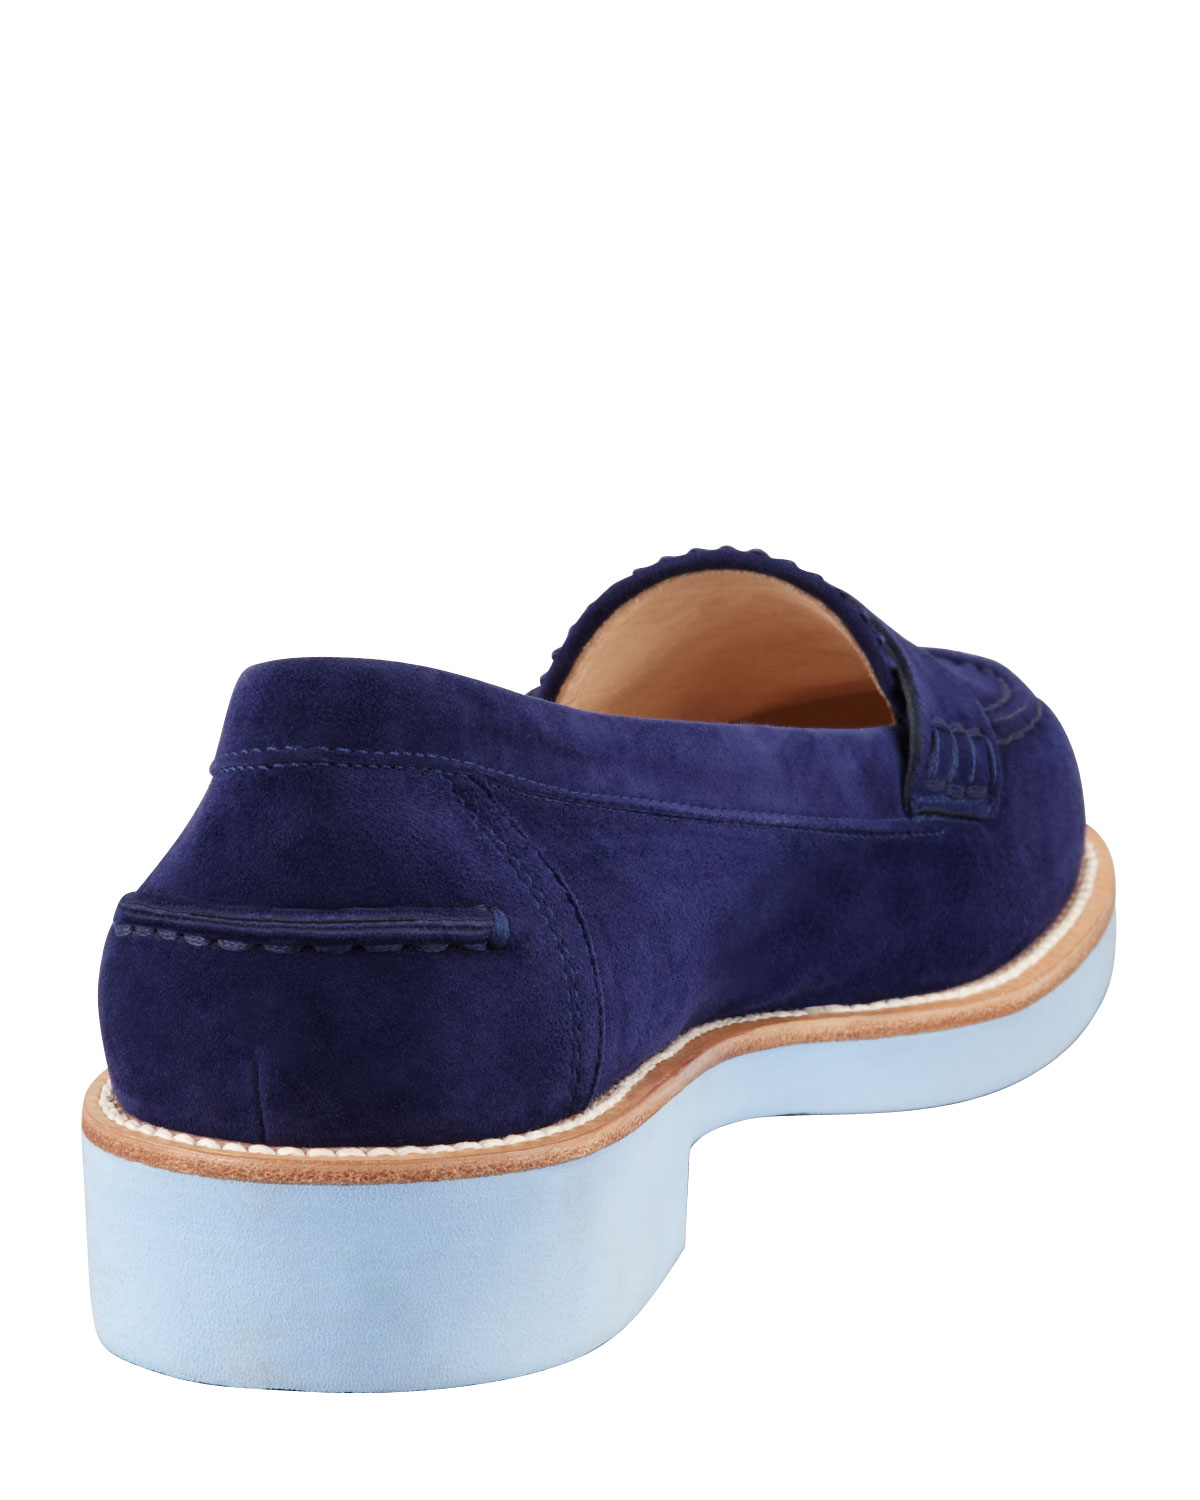 Tod's Ivy Penny Keeper Moccasins in Blue | Lyst